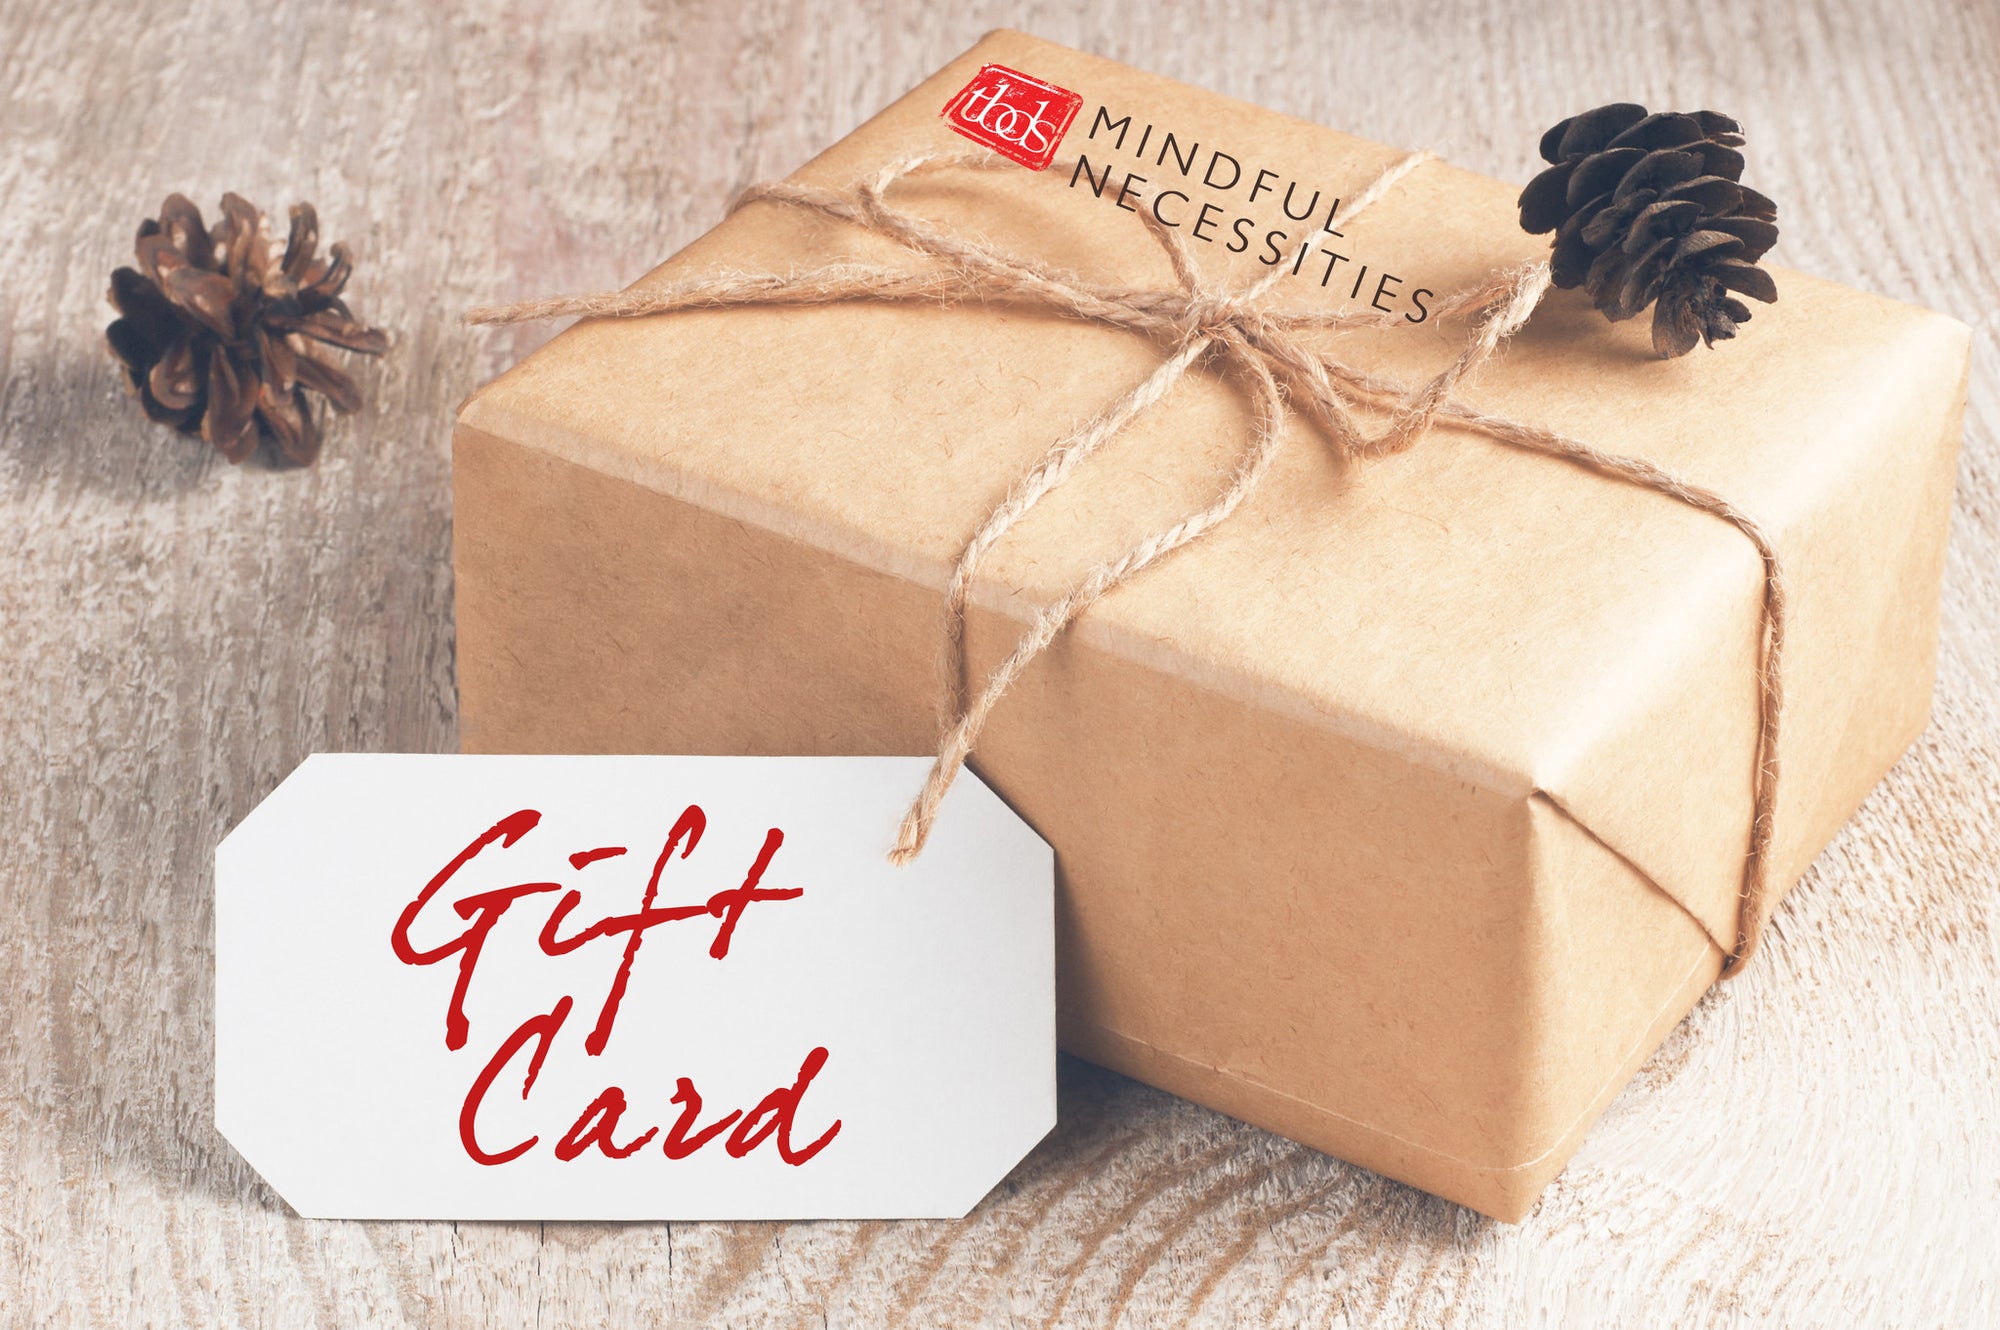 Mindful Necessities Gift Card